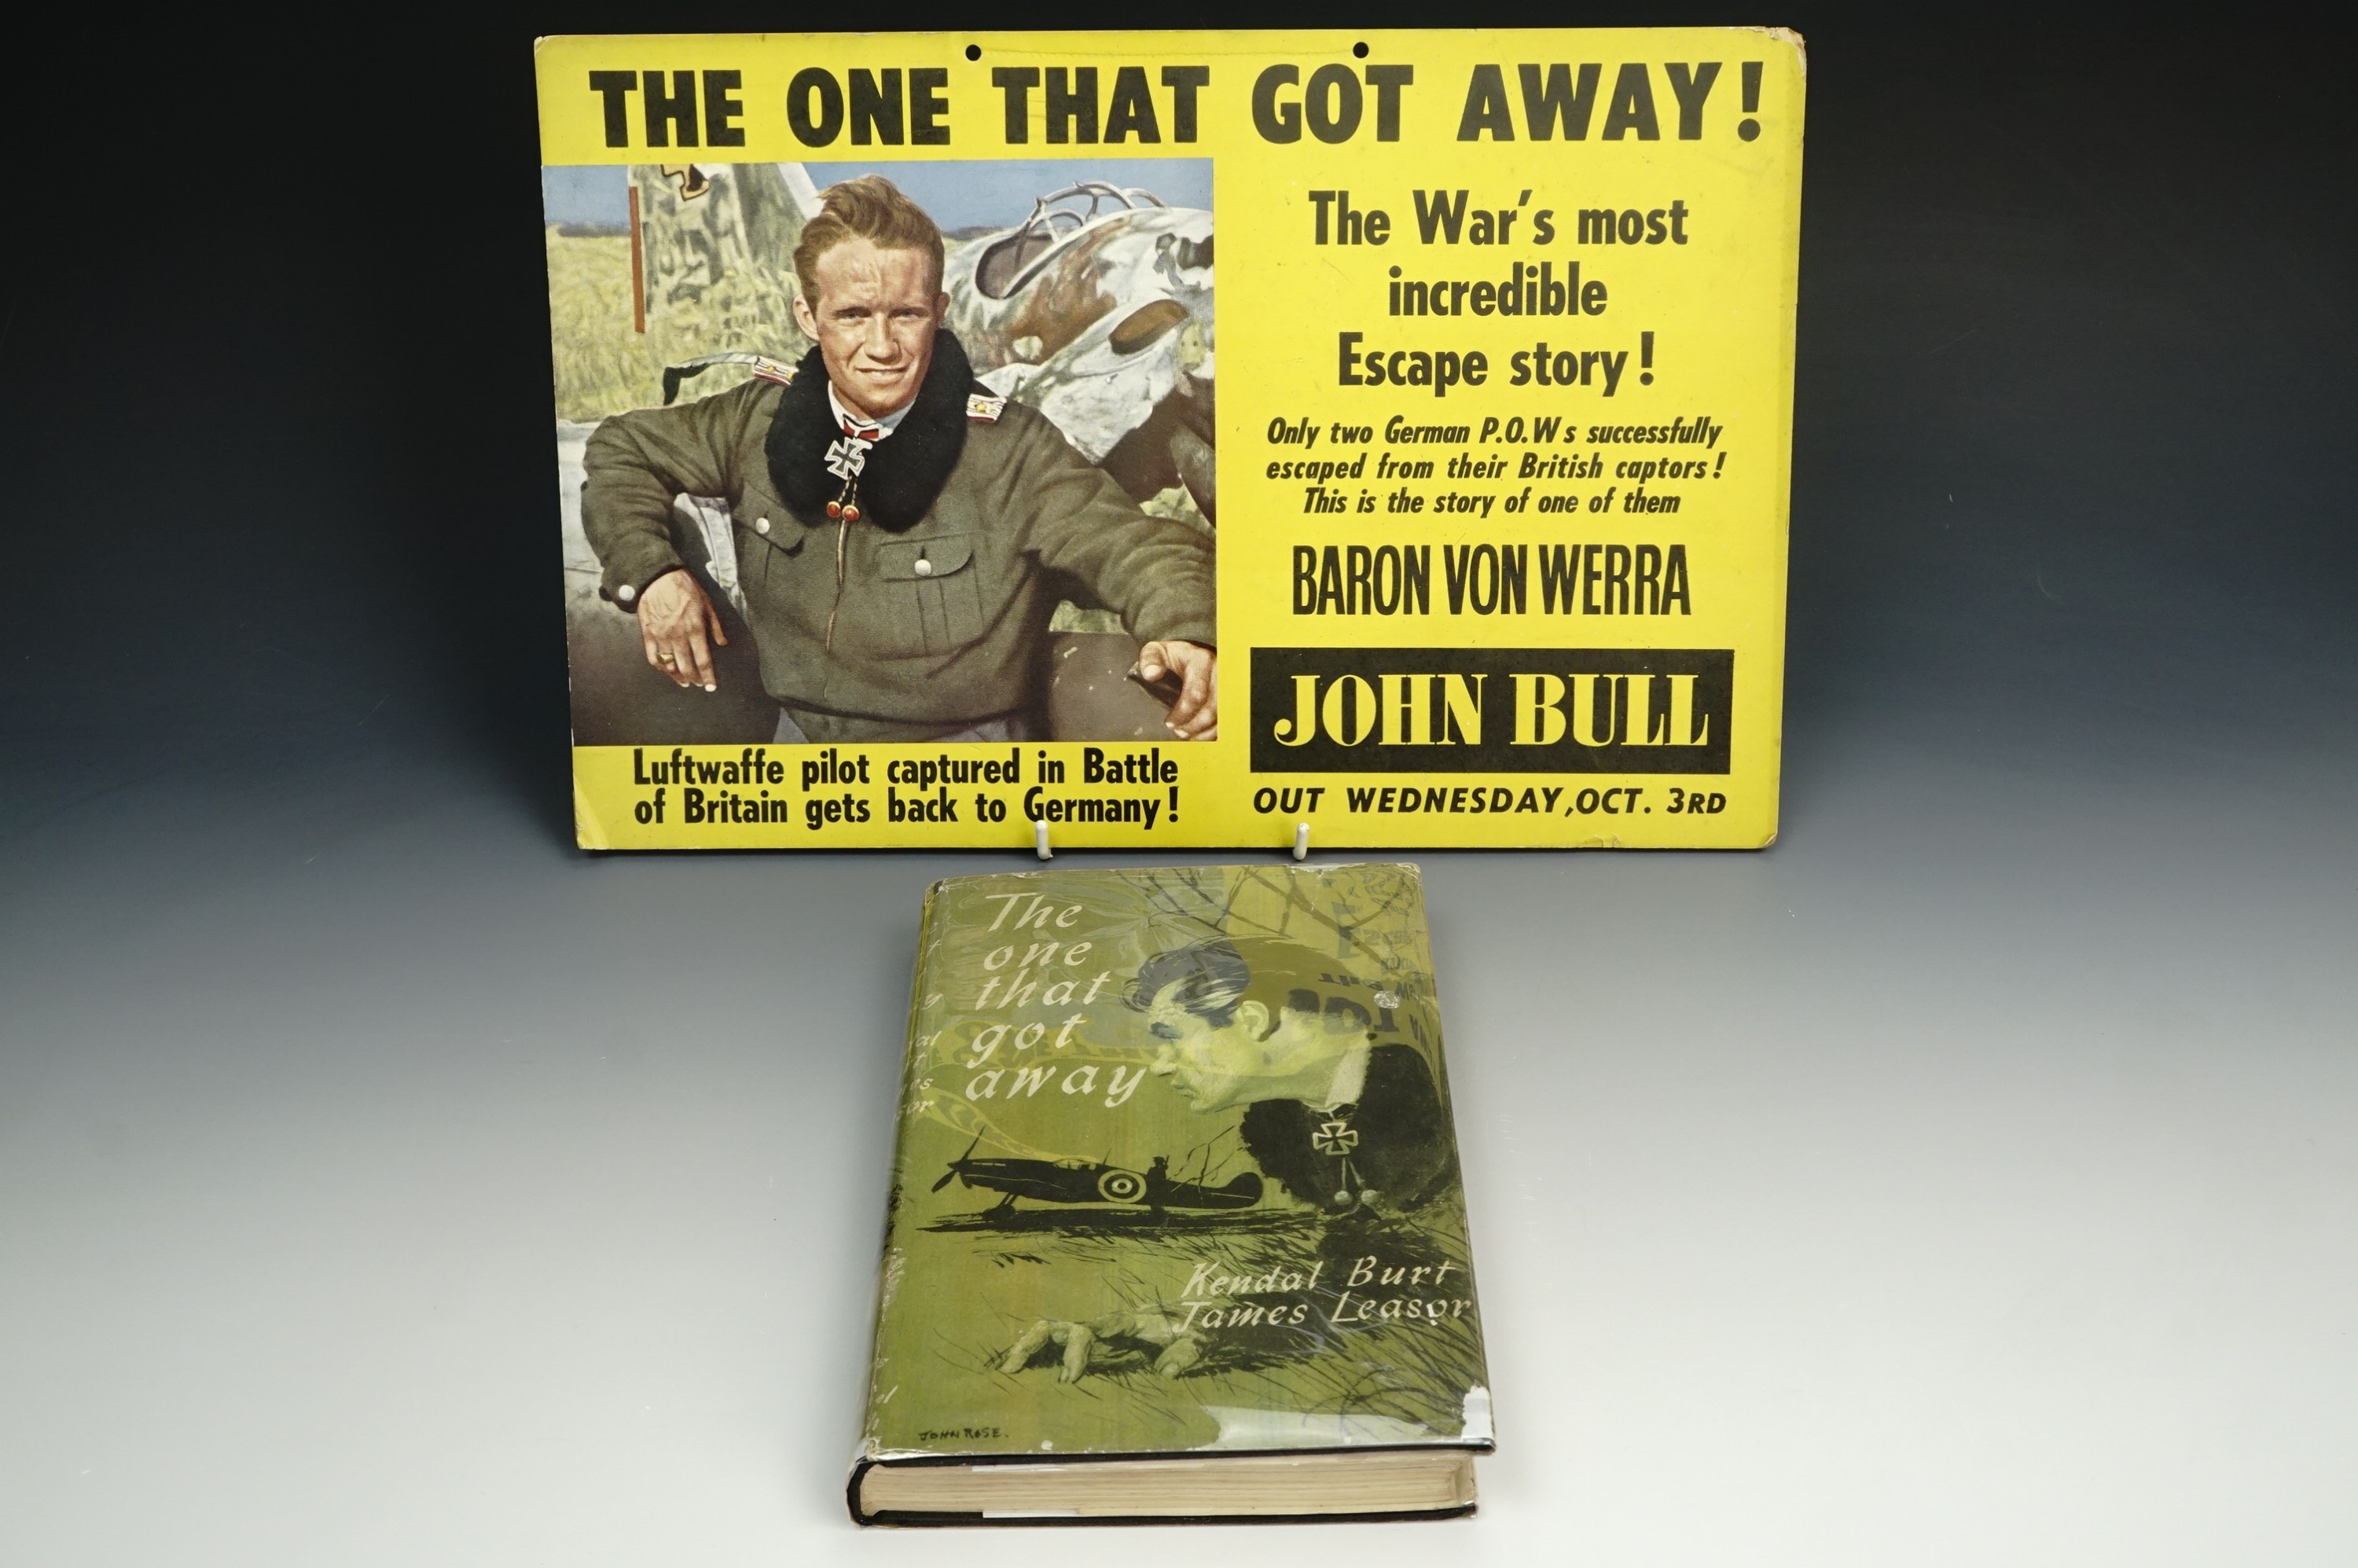 Kendal Burt and James Leasor, "The One That Got Away", 1956 first edition, together with a